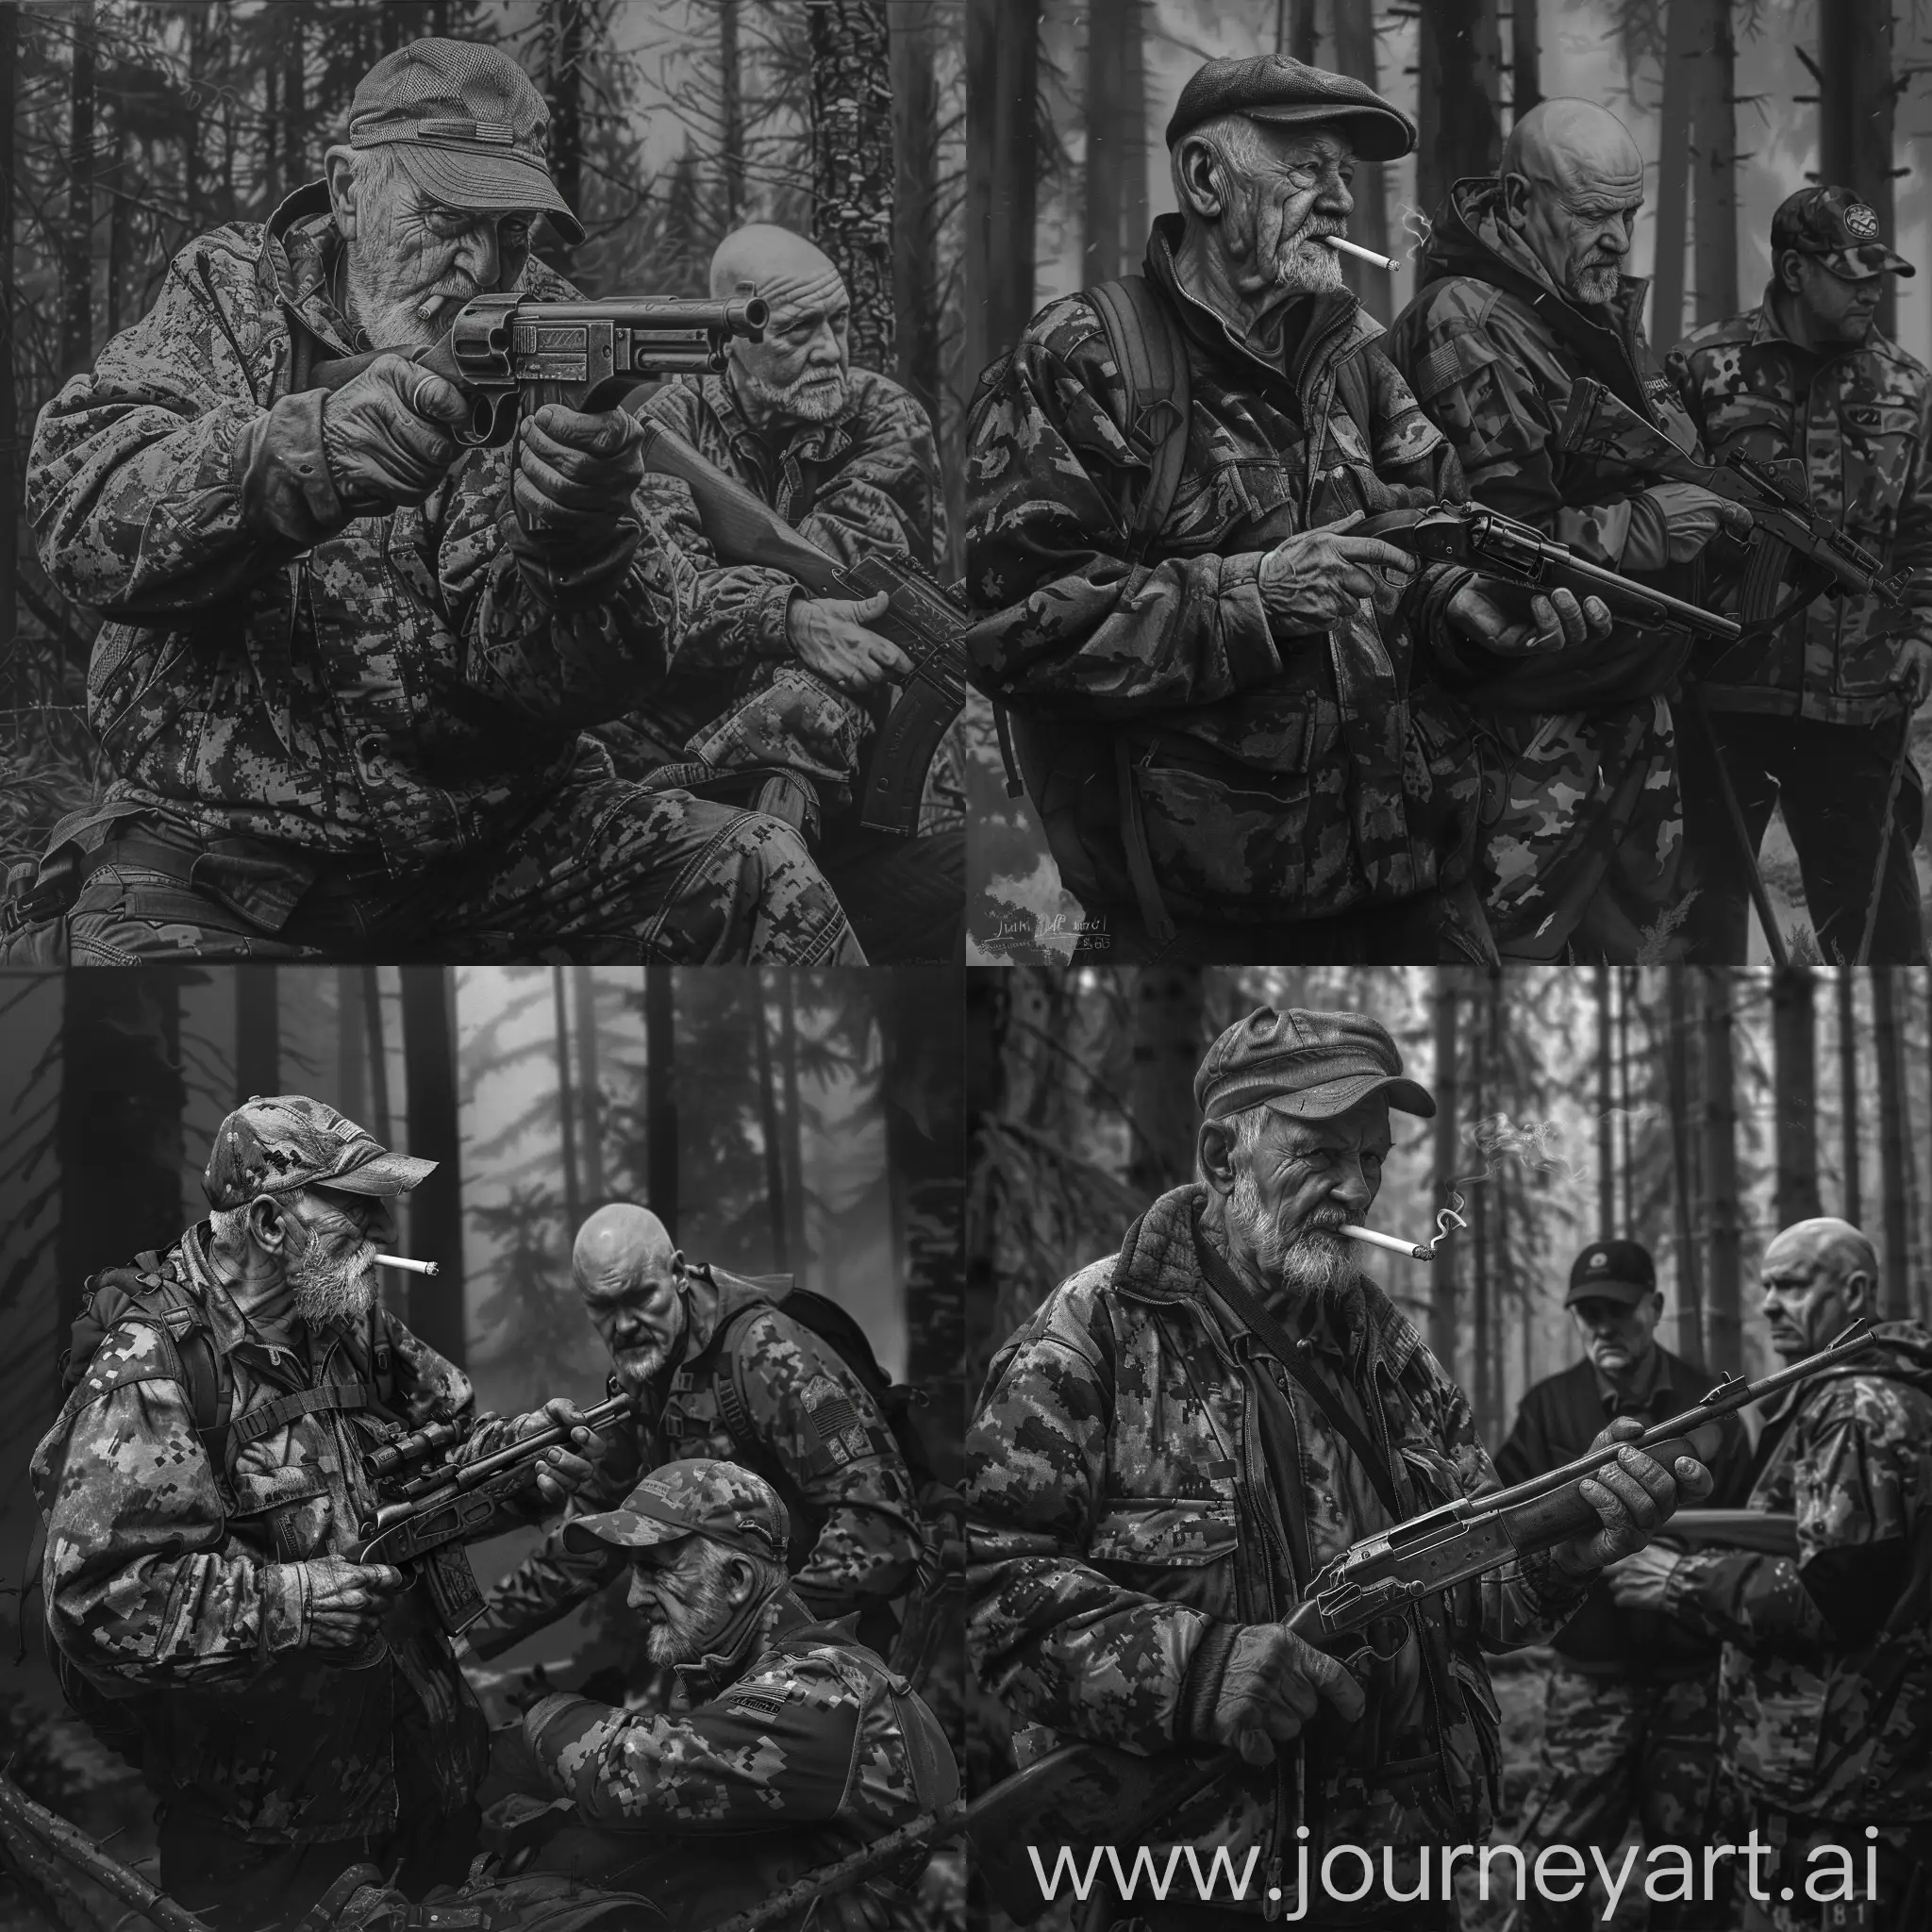 forest, taiga, three hunters, one hunter is an old man, a cigarette in his teeth, an old gun in his hands, an old camouflage jacket, a hat, a gray beard, another man is dressed in a camouflage jacket and dark pants, a bald head, an old gun in his hand, a third man in a cap, a camouflage dark jacket, an old gun in his hands, forest, taiga, gloomy atmosphere, black and white art, drawing, ultra detail, 8K image quality,  Dark Fantasy Style, John Kenn Mortenson style draw